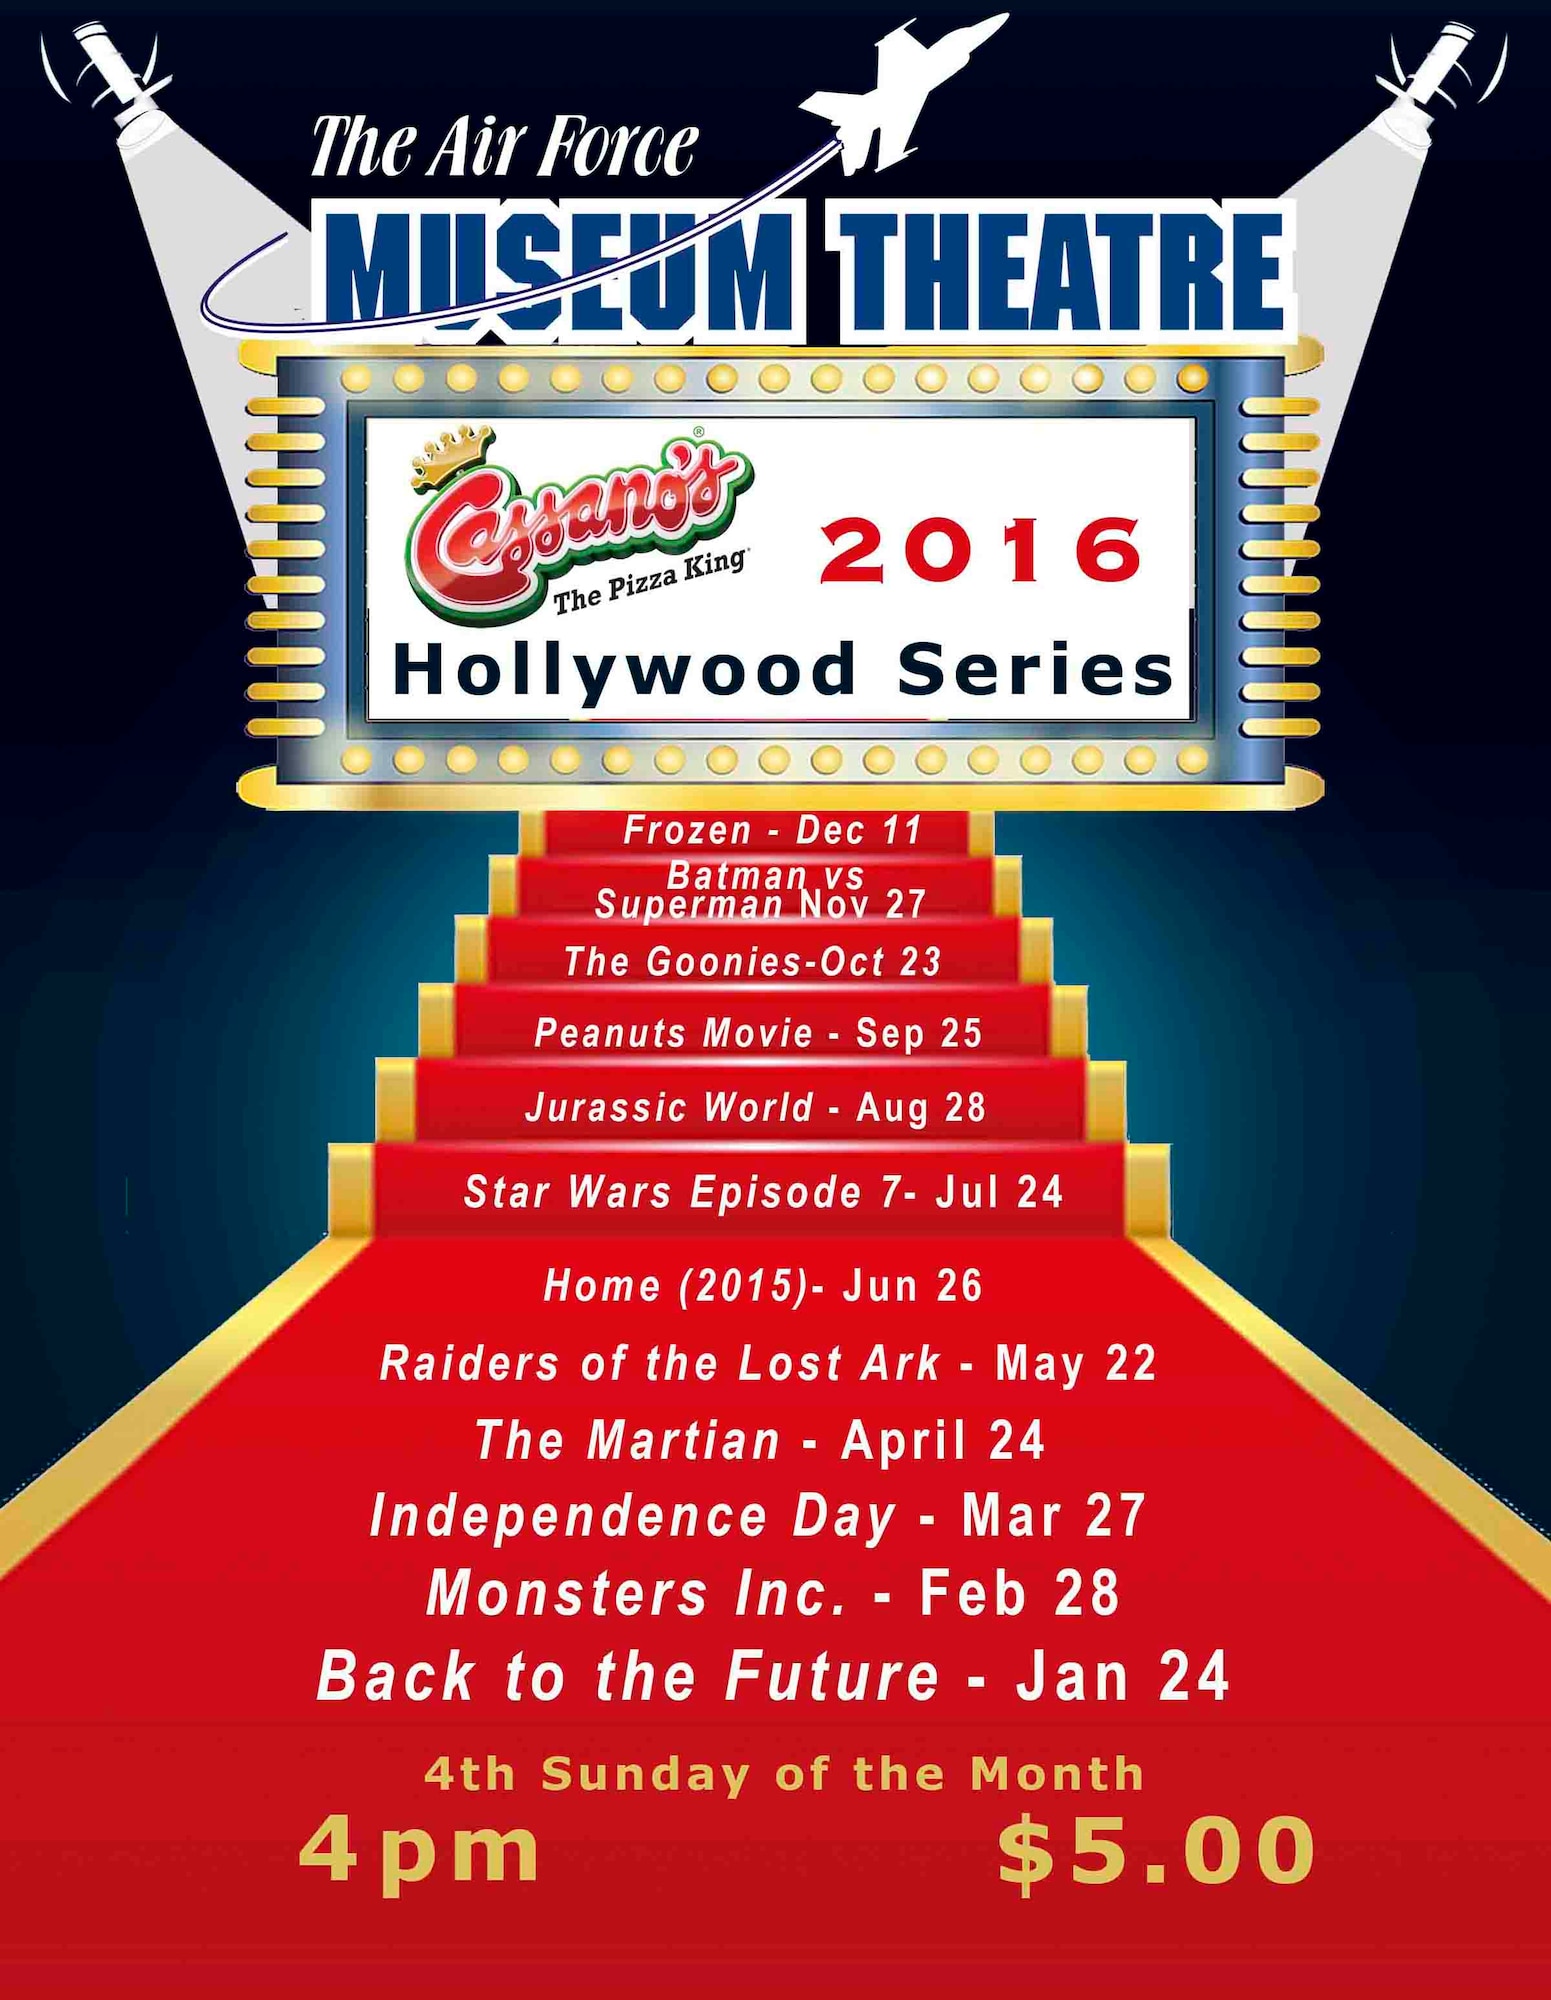 The Air Force Museum Theatre's 2016 Hollywood Film Series will feature Hollywood blockbusters and classic favorites on the largest screen in Southwest Ohio. Tickets are only $5 a person for each film, and all films will start at 4 p.m. on the fourth Sunday of each month (December movie is Dec. 11). (AFMF graphic - updated February 2016)